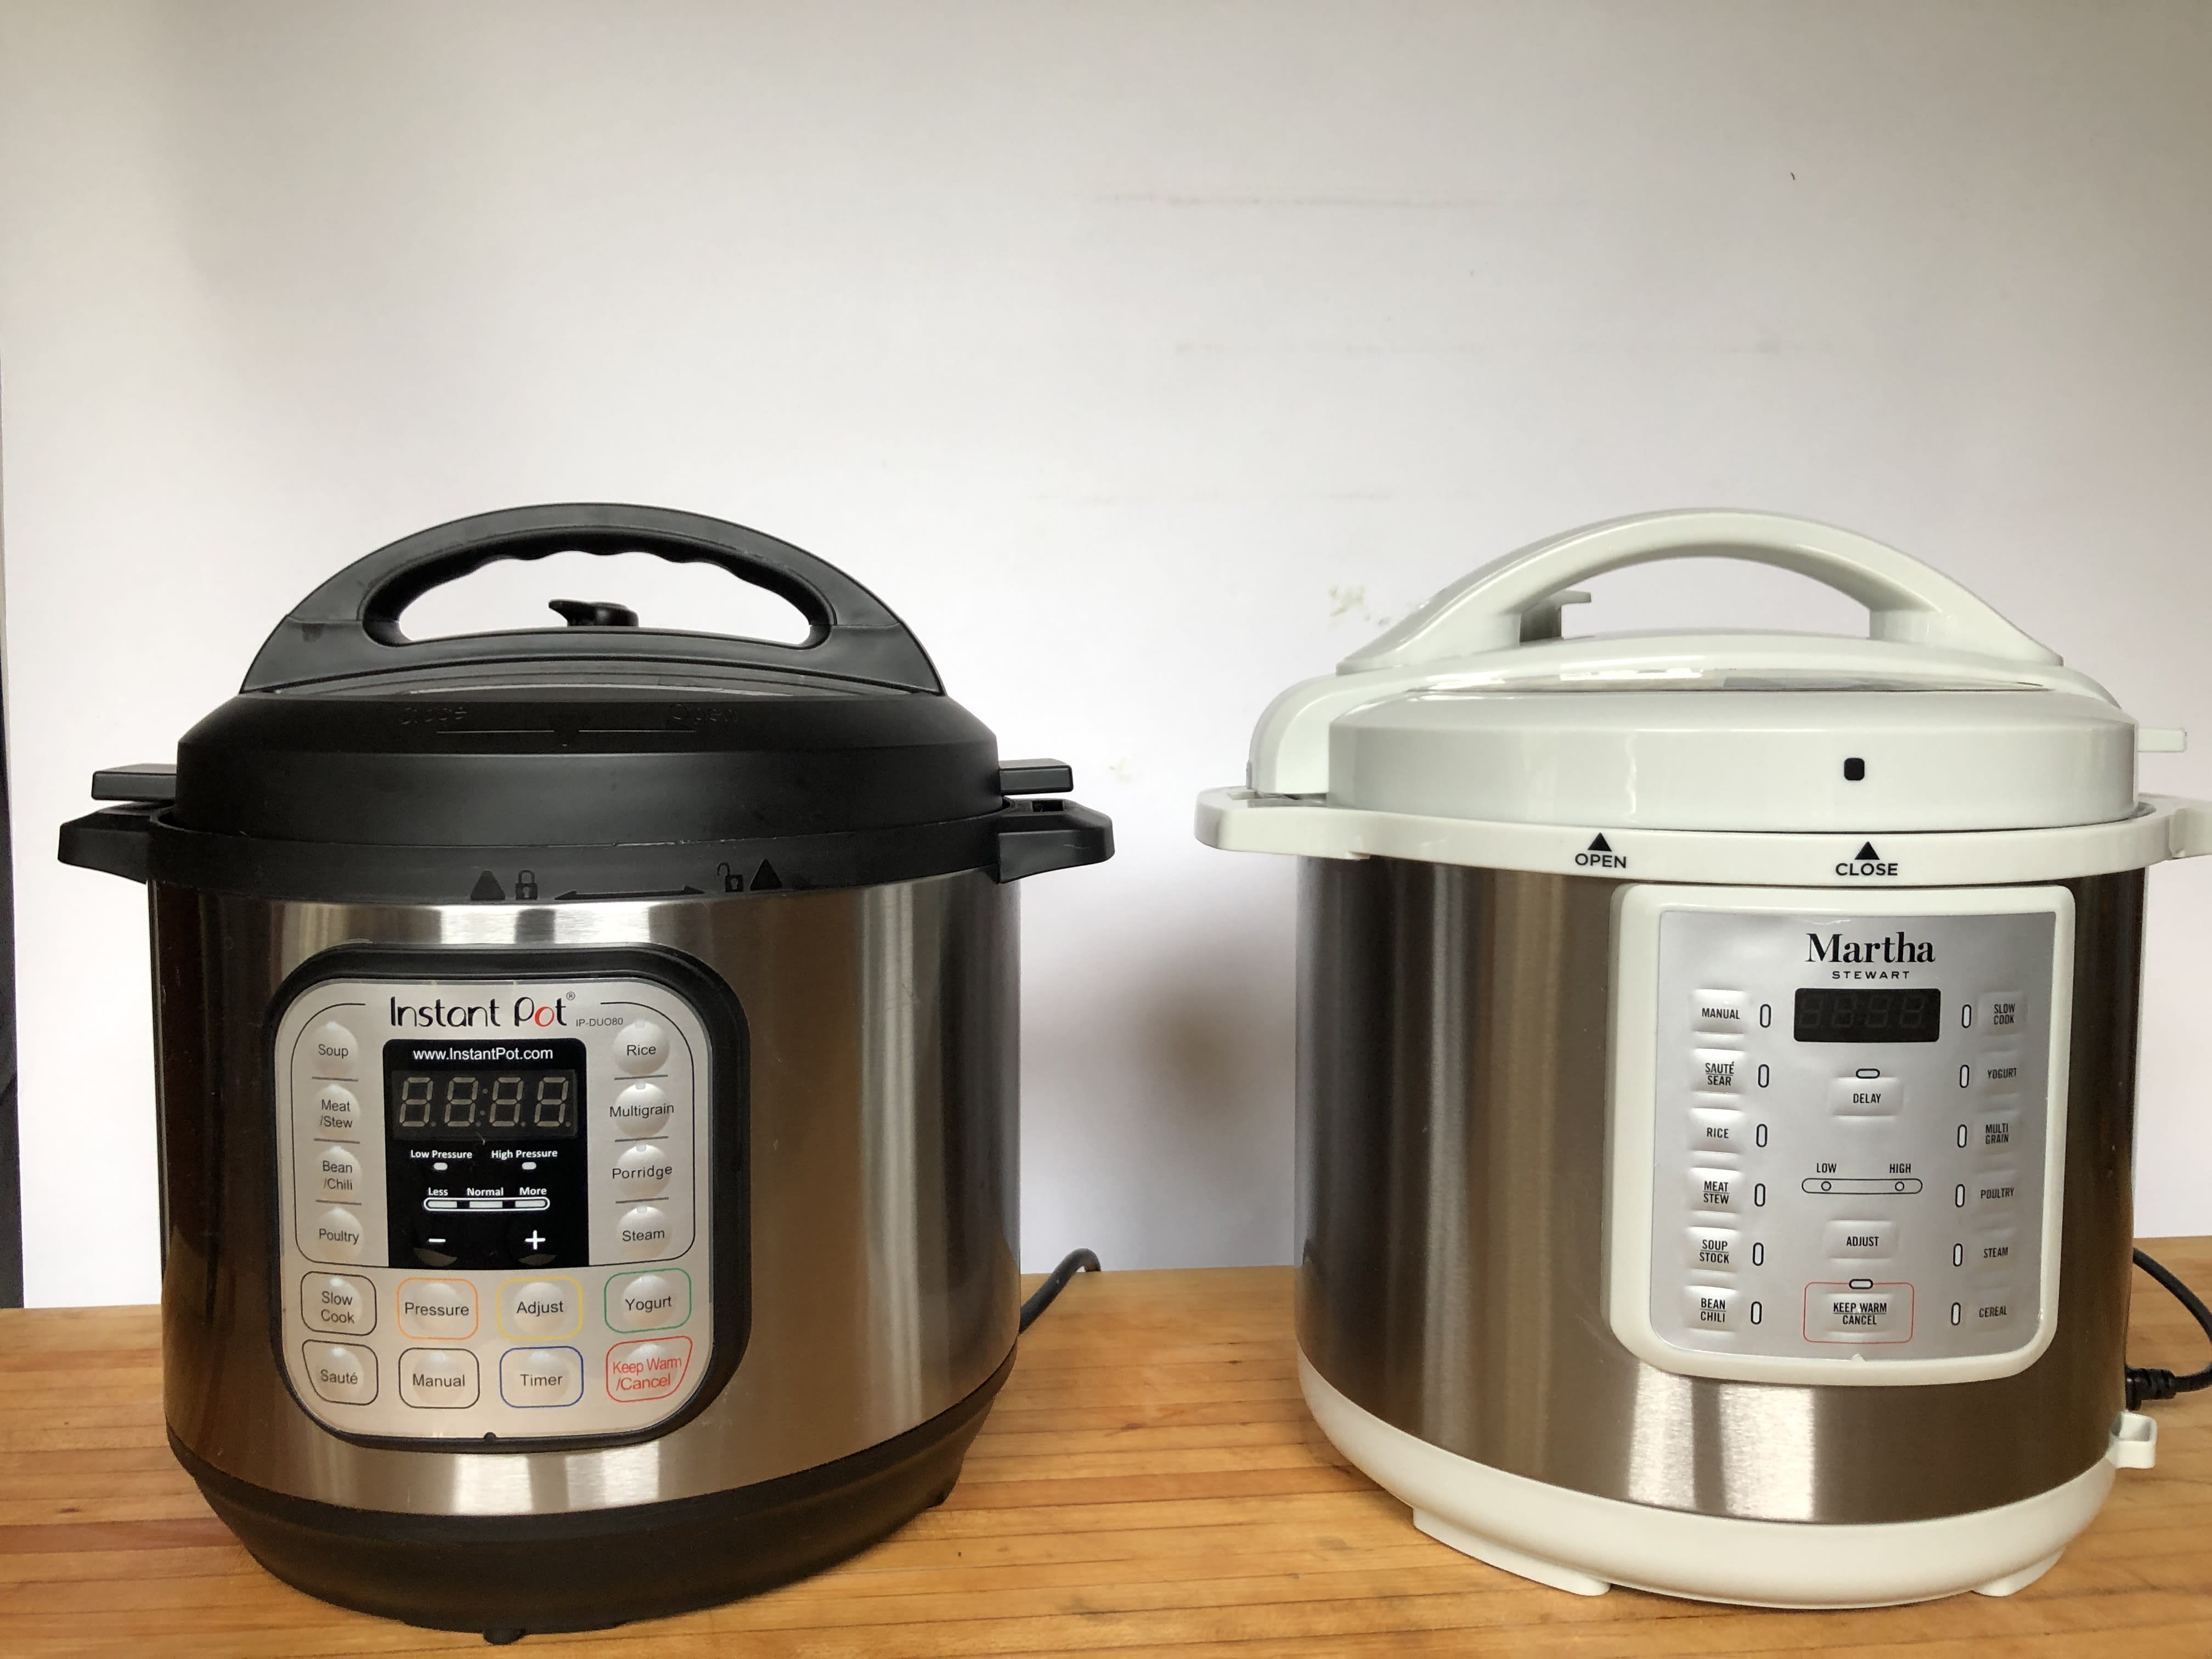 Instant Pot Ultra 80 Stainless 8 Qt Multi- Use Programmable Pressure Cooker